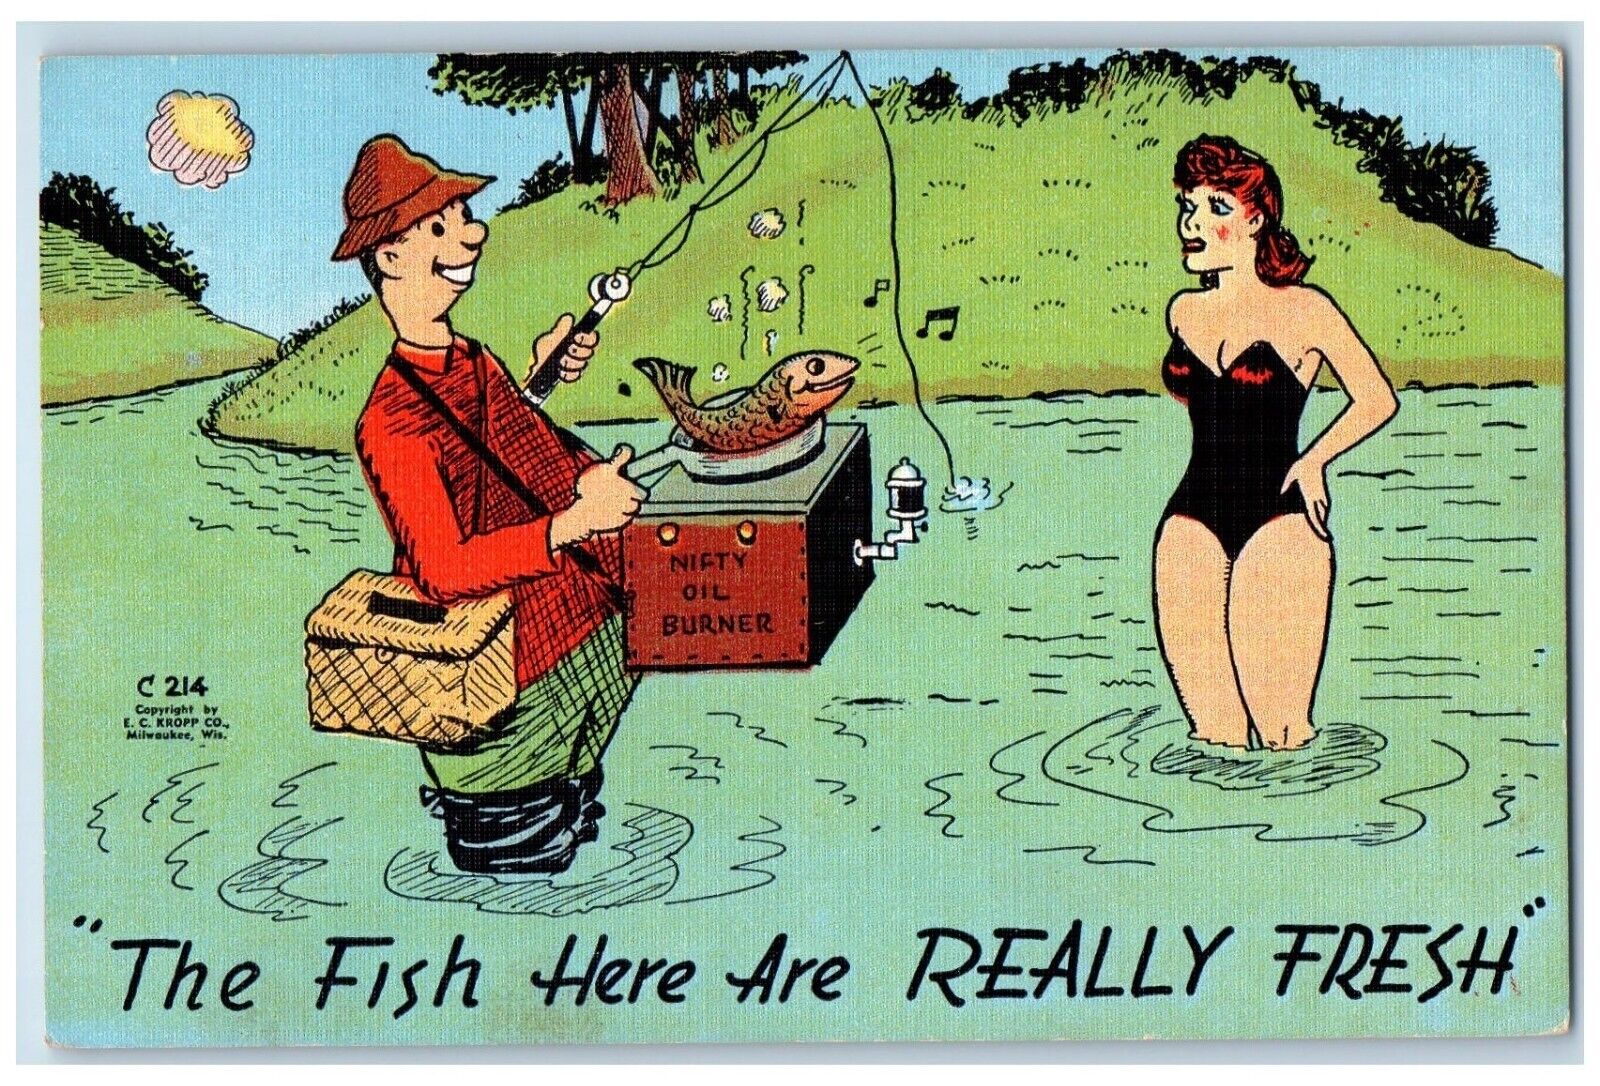 c1930's Woman Swimsuit Fishermen Fish Here Are Really Fresh Sycamore IL Postcard